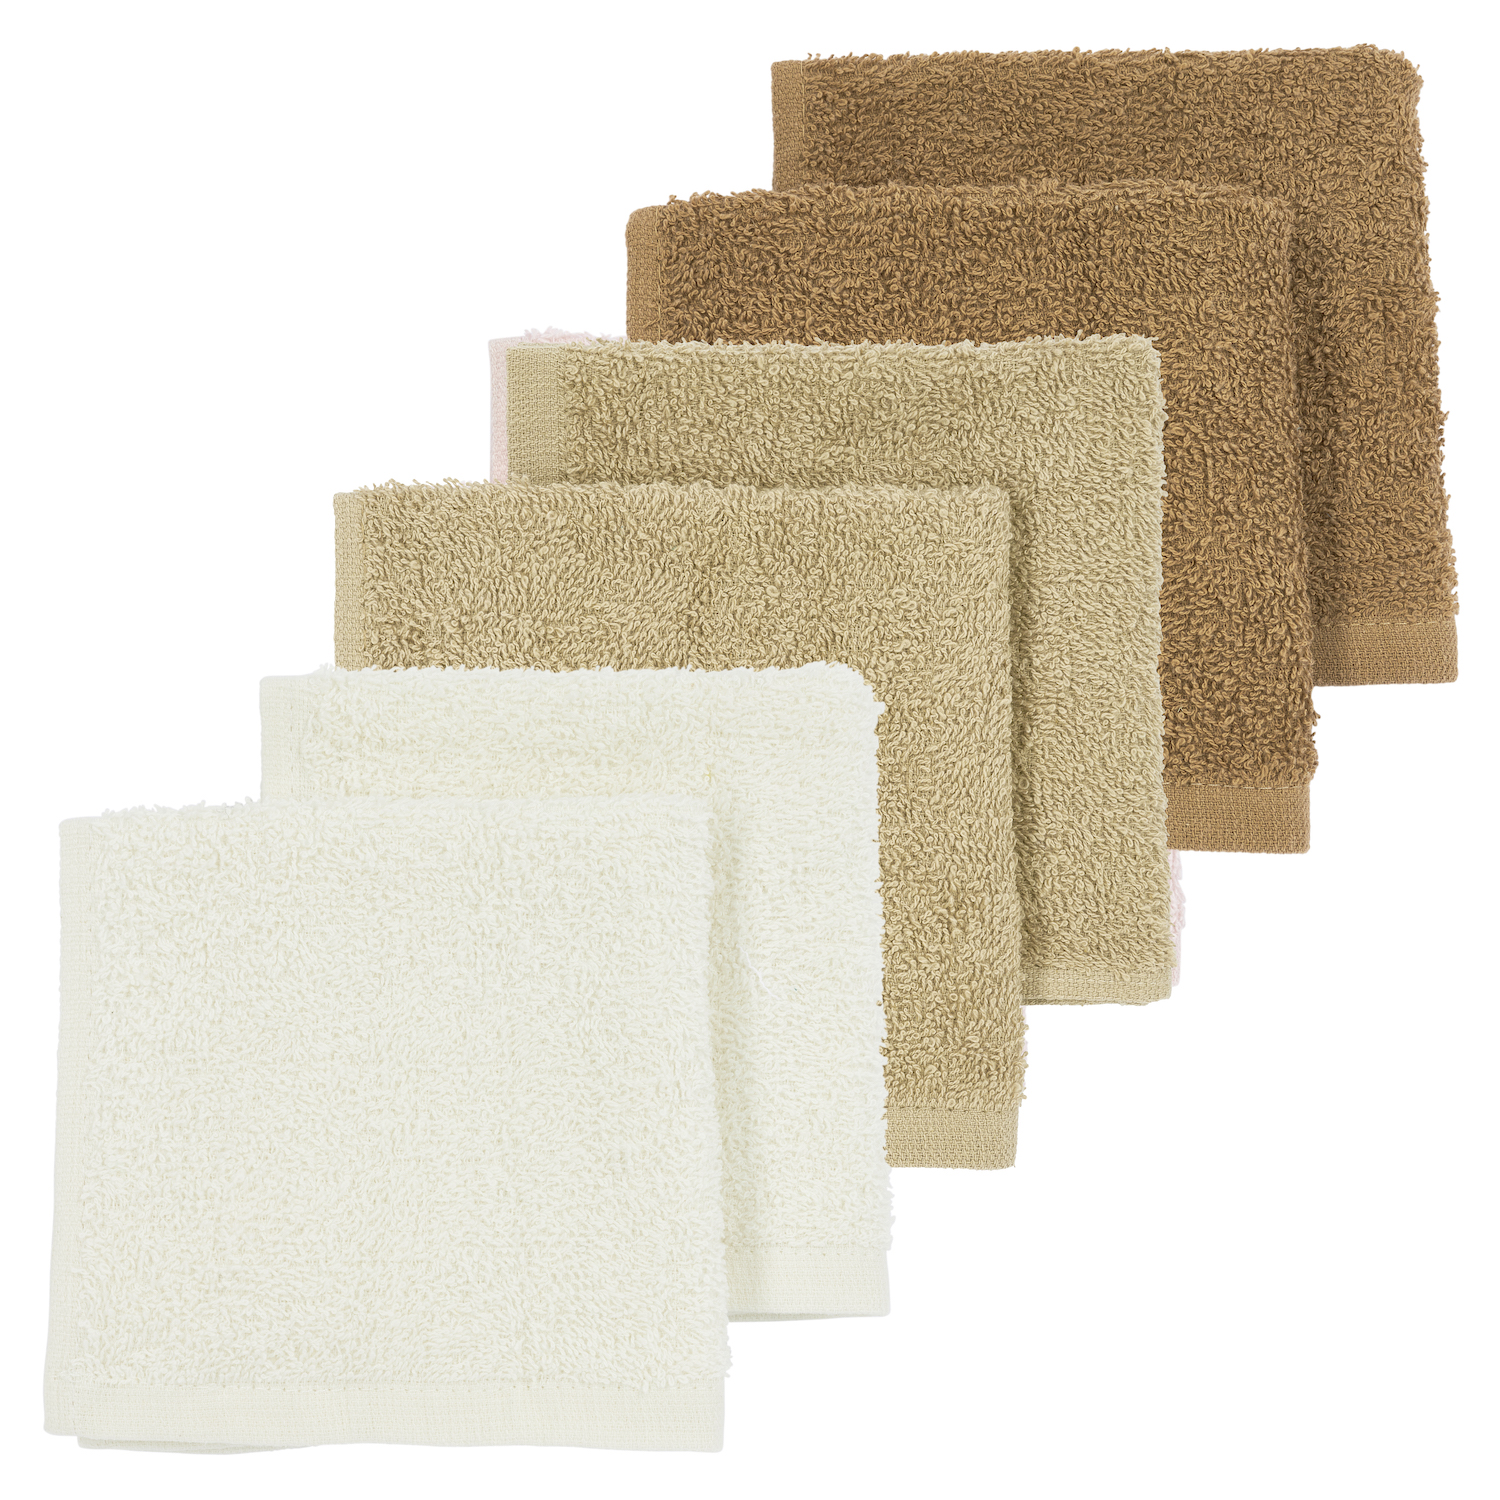 Facecloth 6-pack terry Uni - offwhite/sand/toffee - 30x30cm